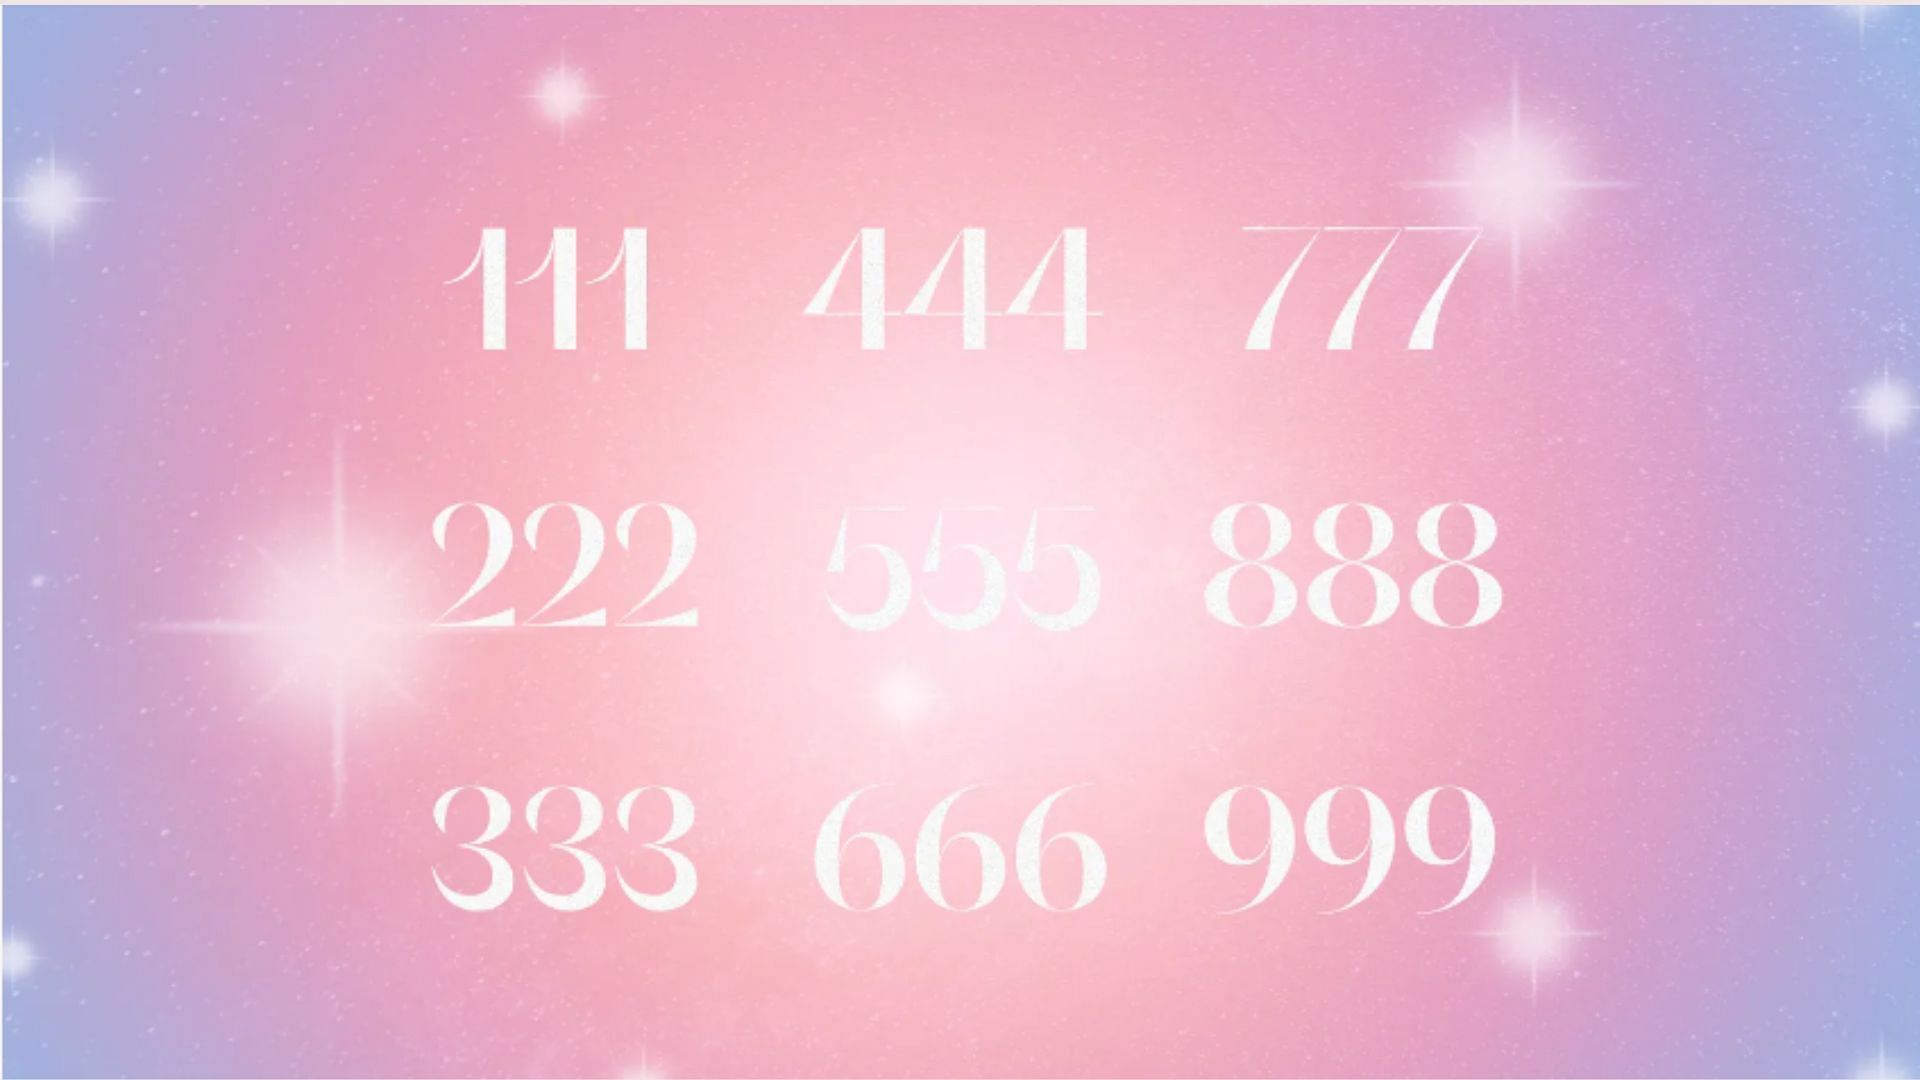 What angel numbers say about your life (image via Clara Hendler)